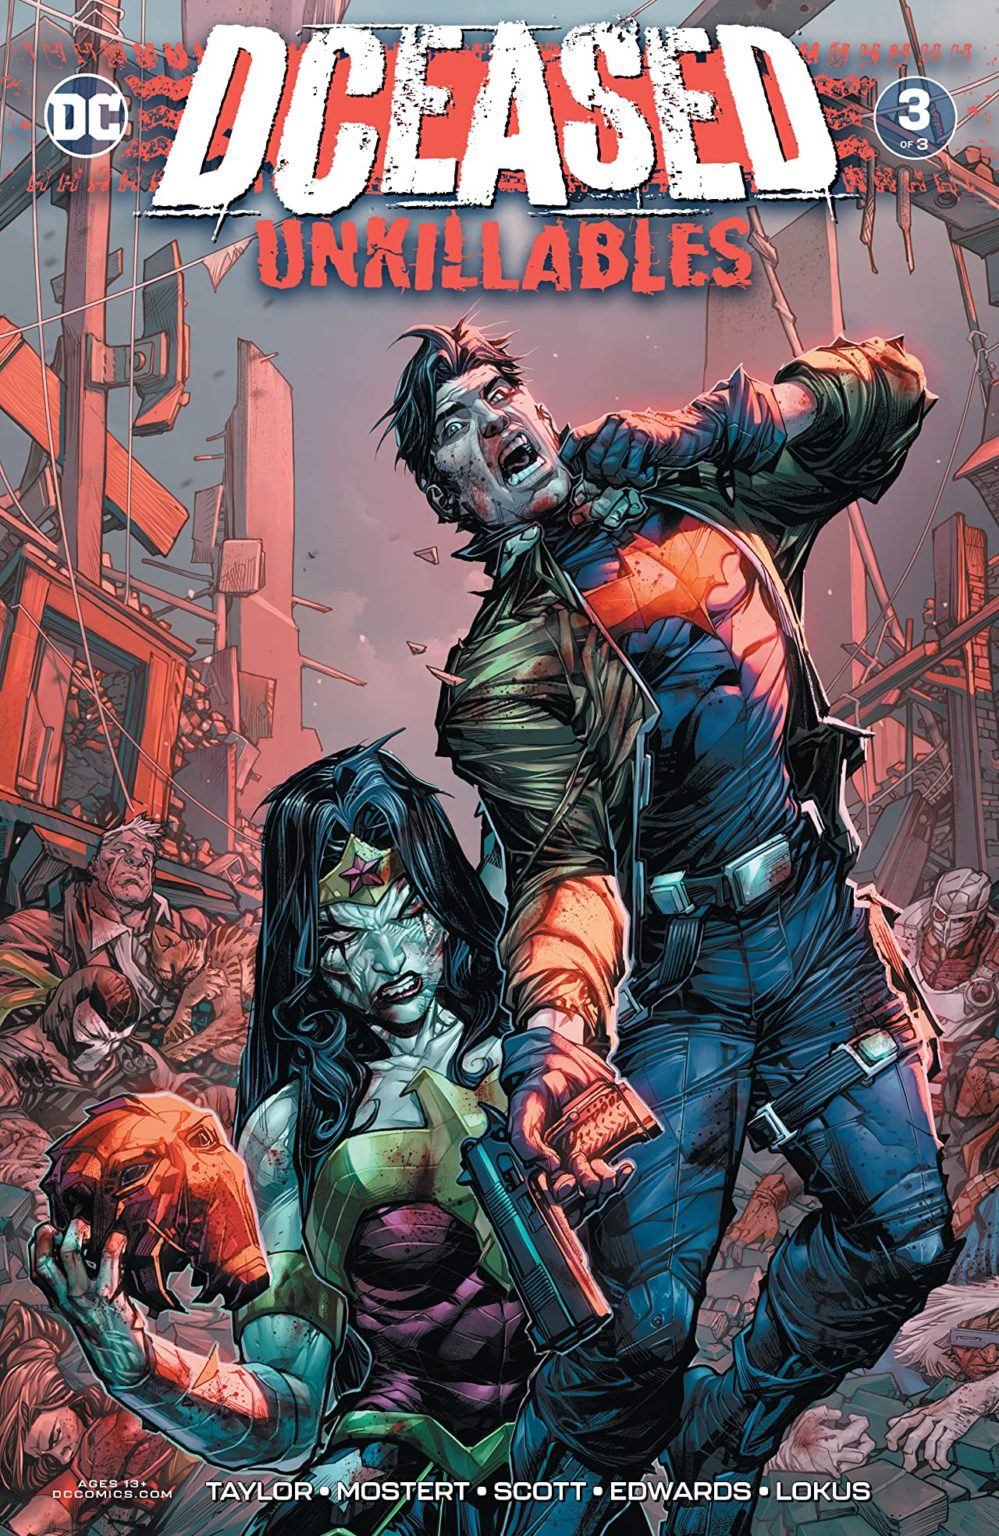 DCeased: Unkillables #6